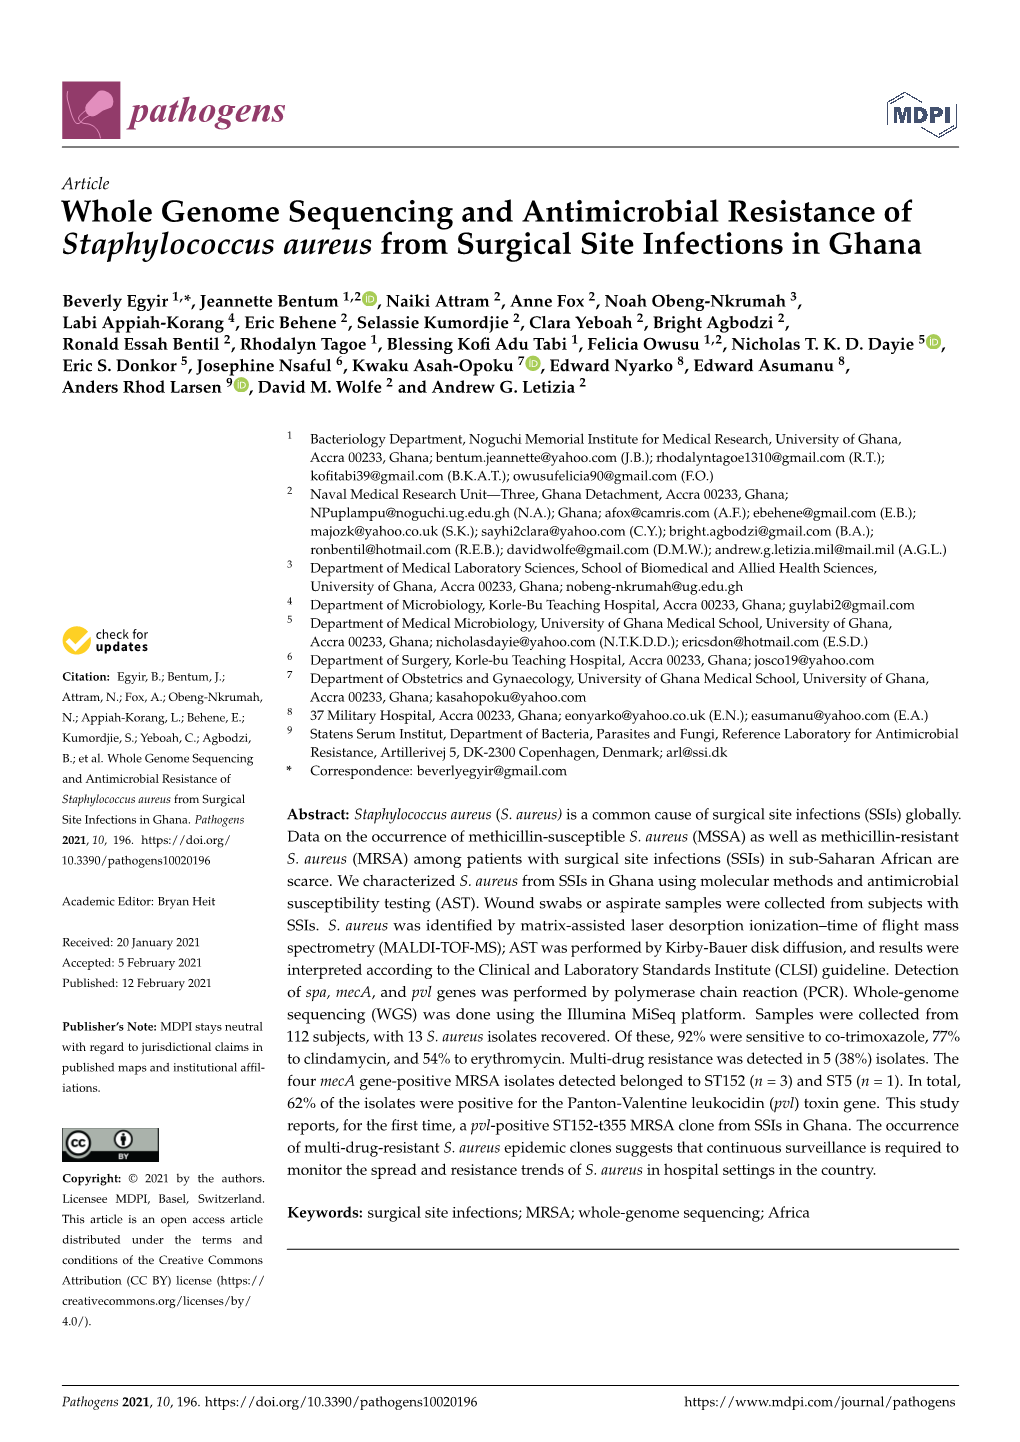 Whole Genome Sequencing and Antimicrobial Resistance of Staphylococcus Aureus from Surgical Site Infections in Ghana